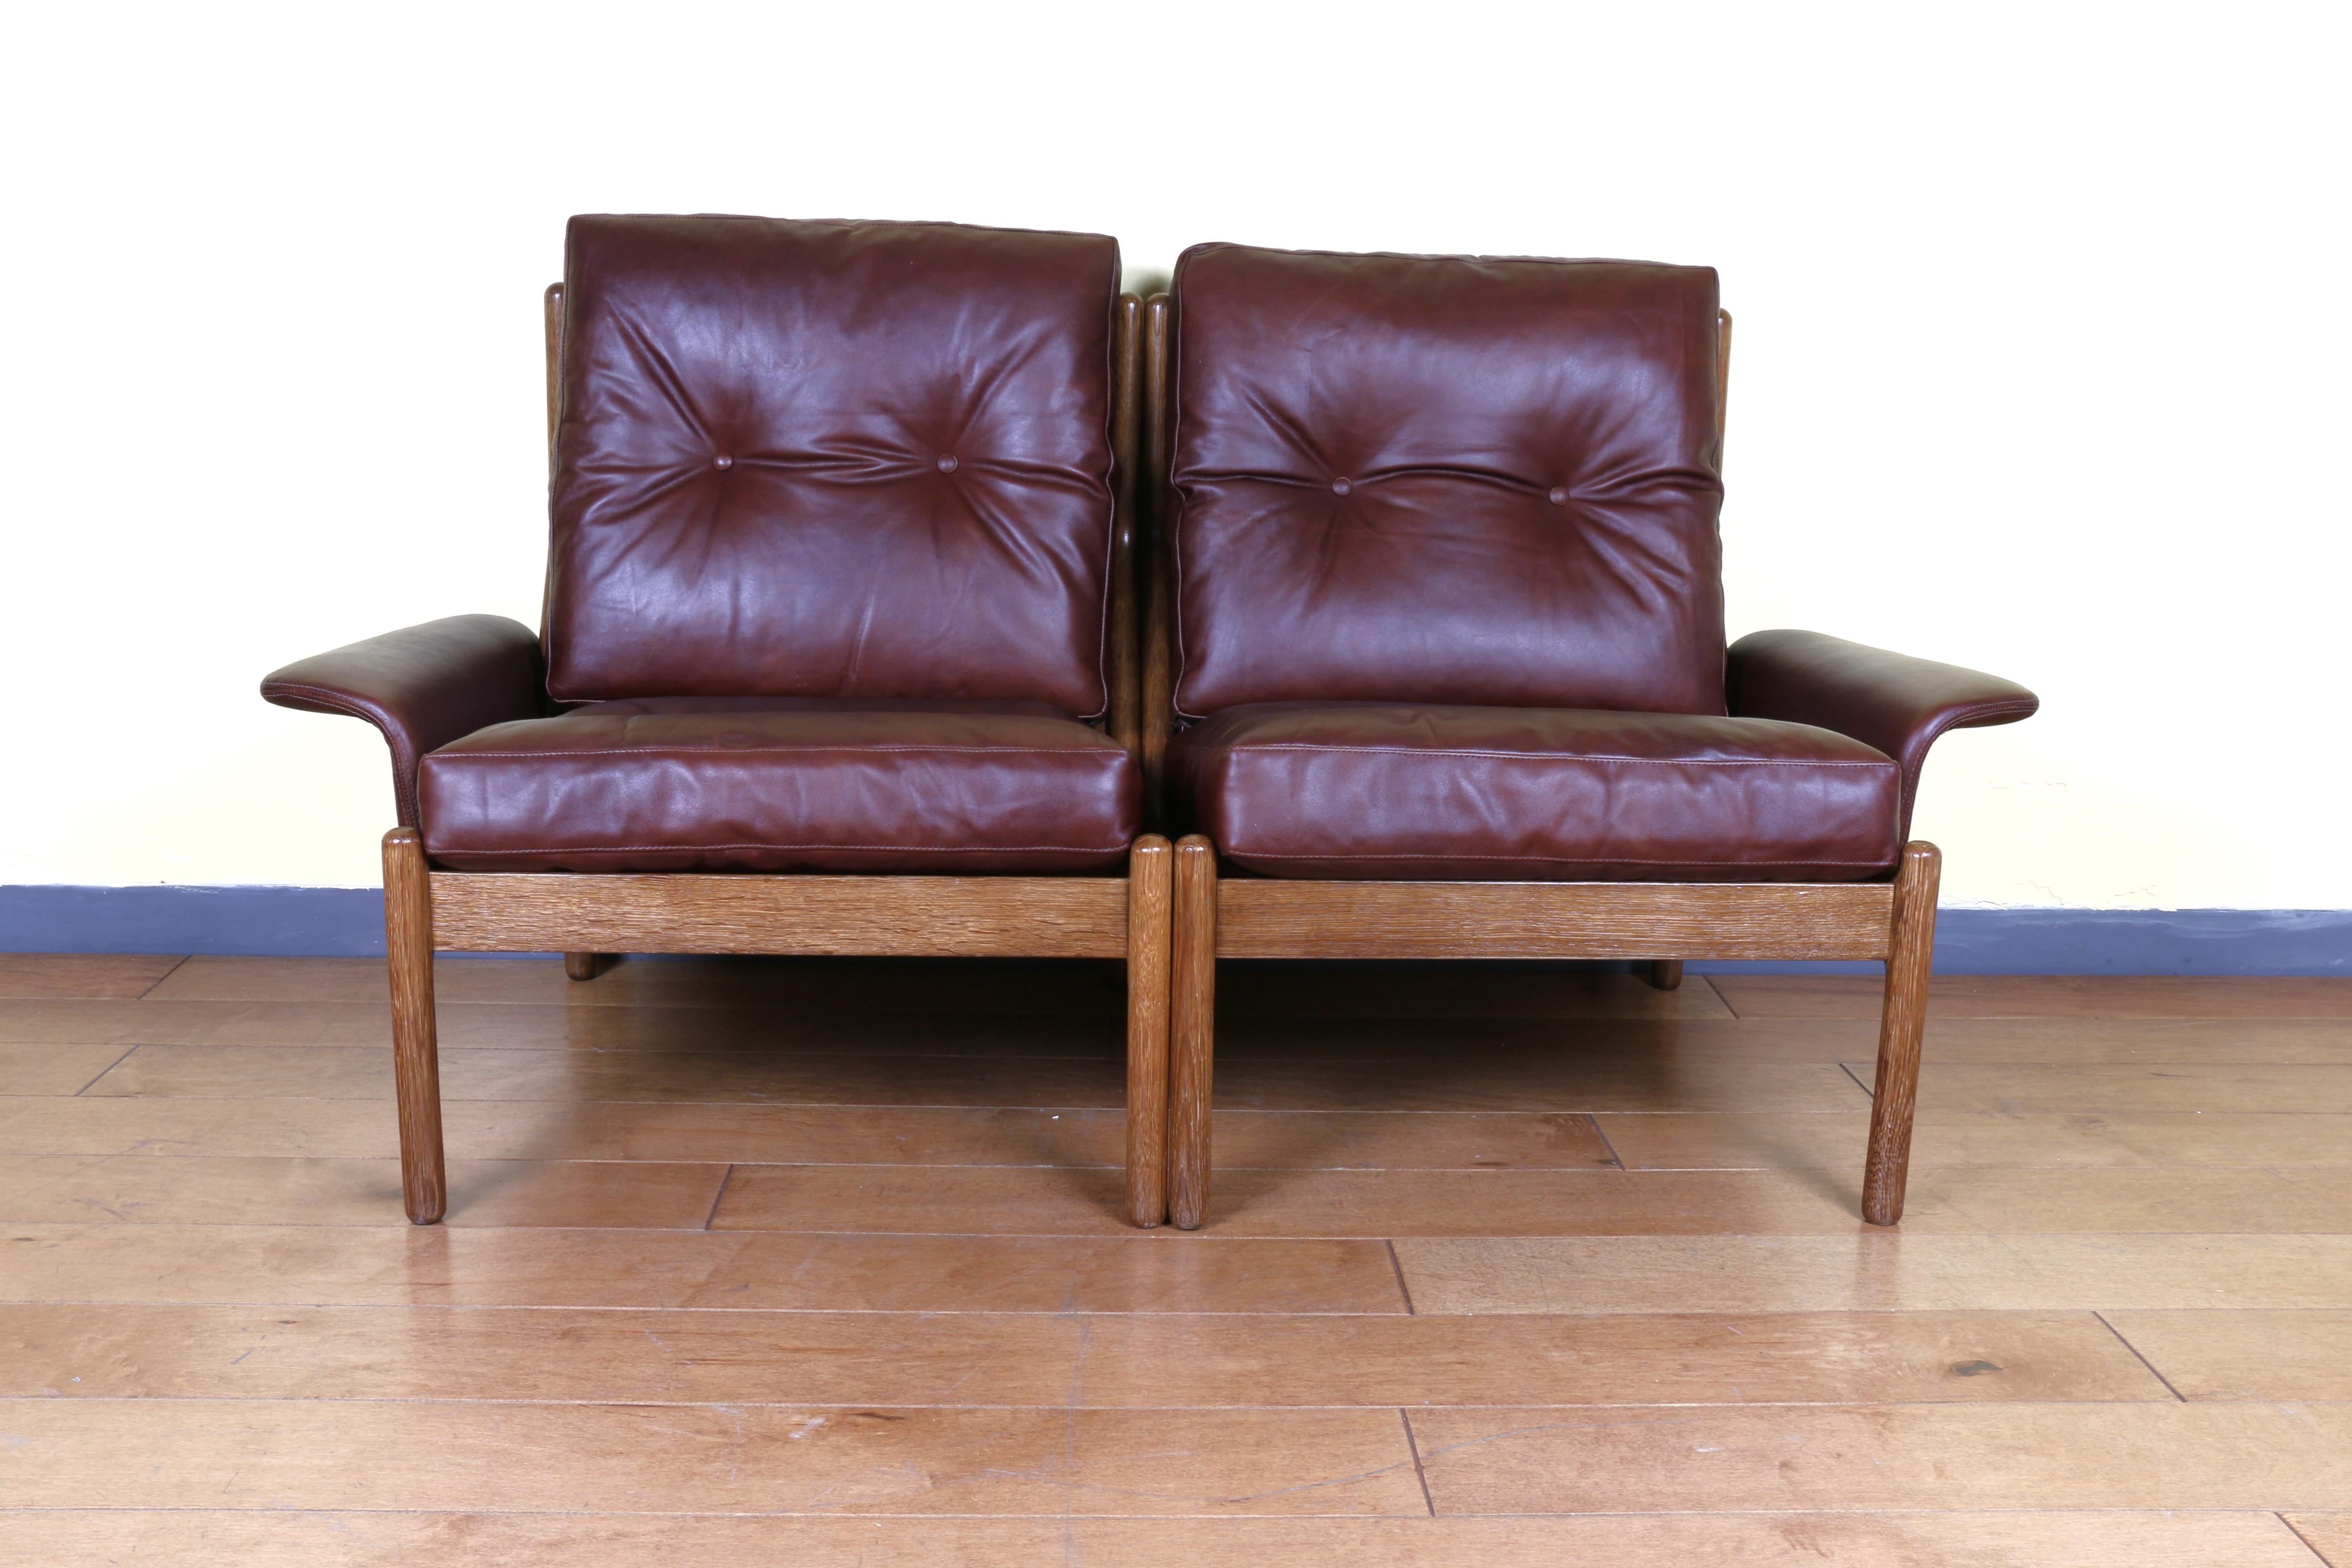 Beautiful Niels Bach lounge chairs completely reupholstered in leather and both have been refinished, They are made of oak wood. It has no scratches on the leather. They are super comfortable to rest. the greatest about these chairs is that you can